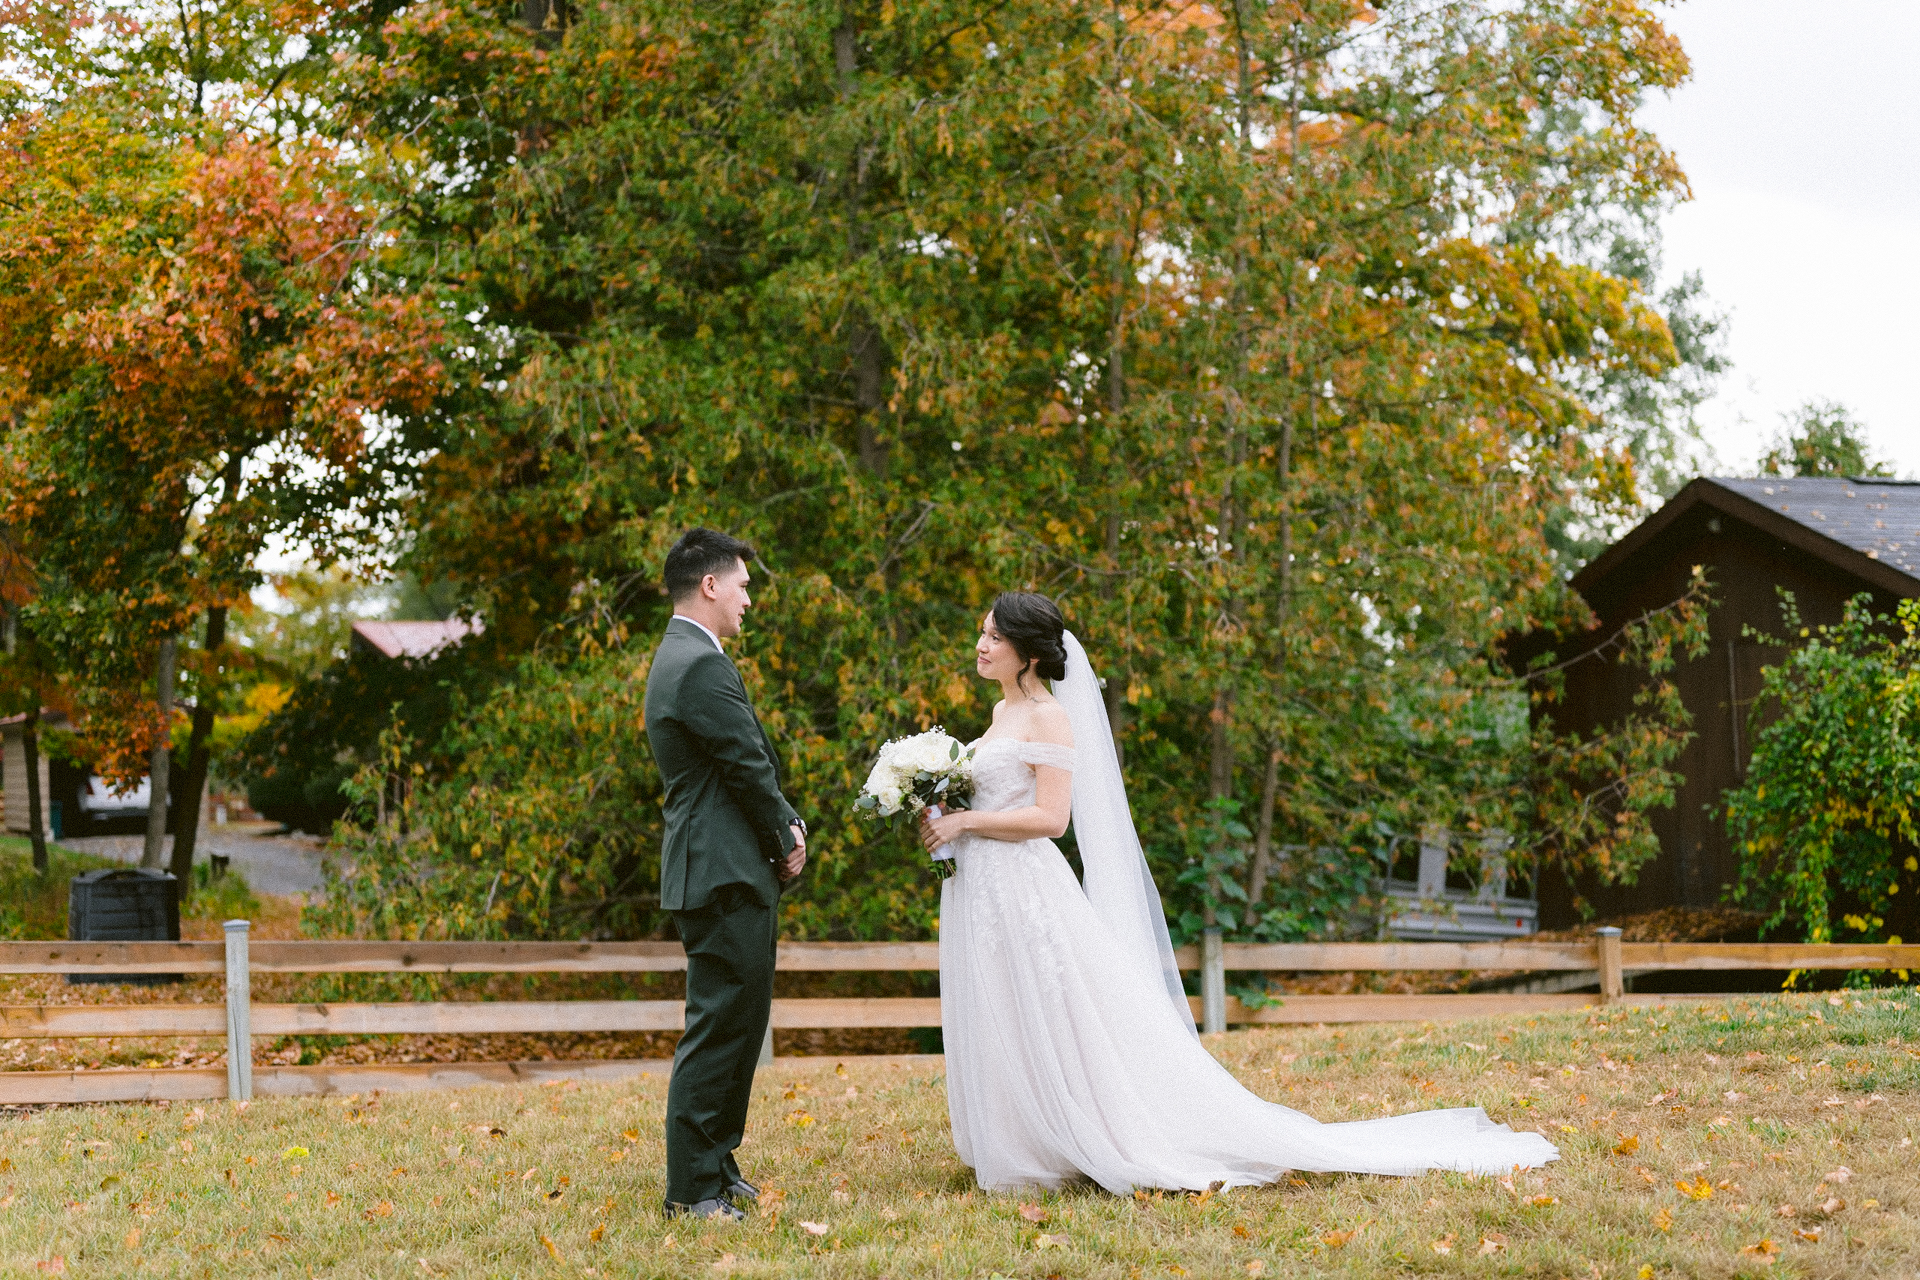 A bride and groom standing together on a lawn with autumn foliage in the background.